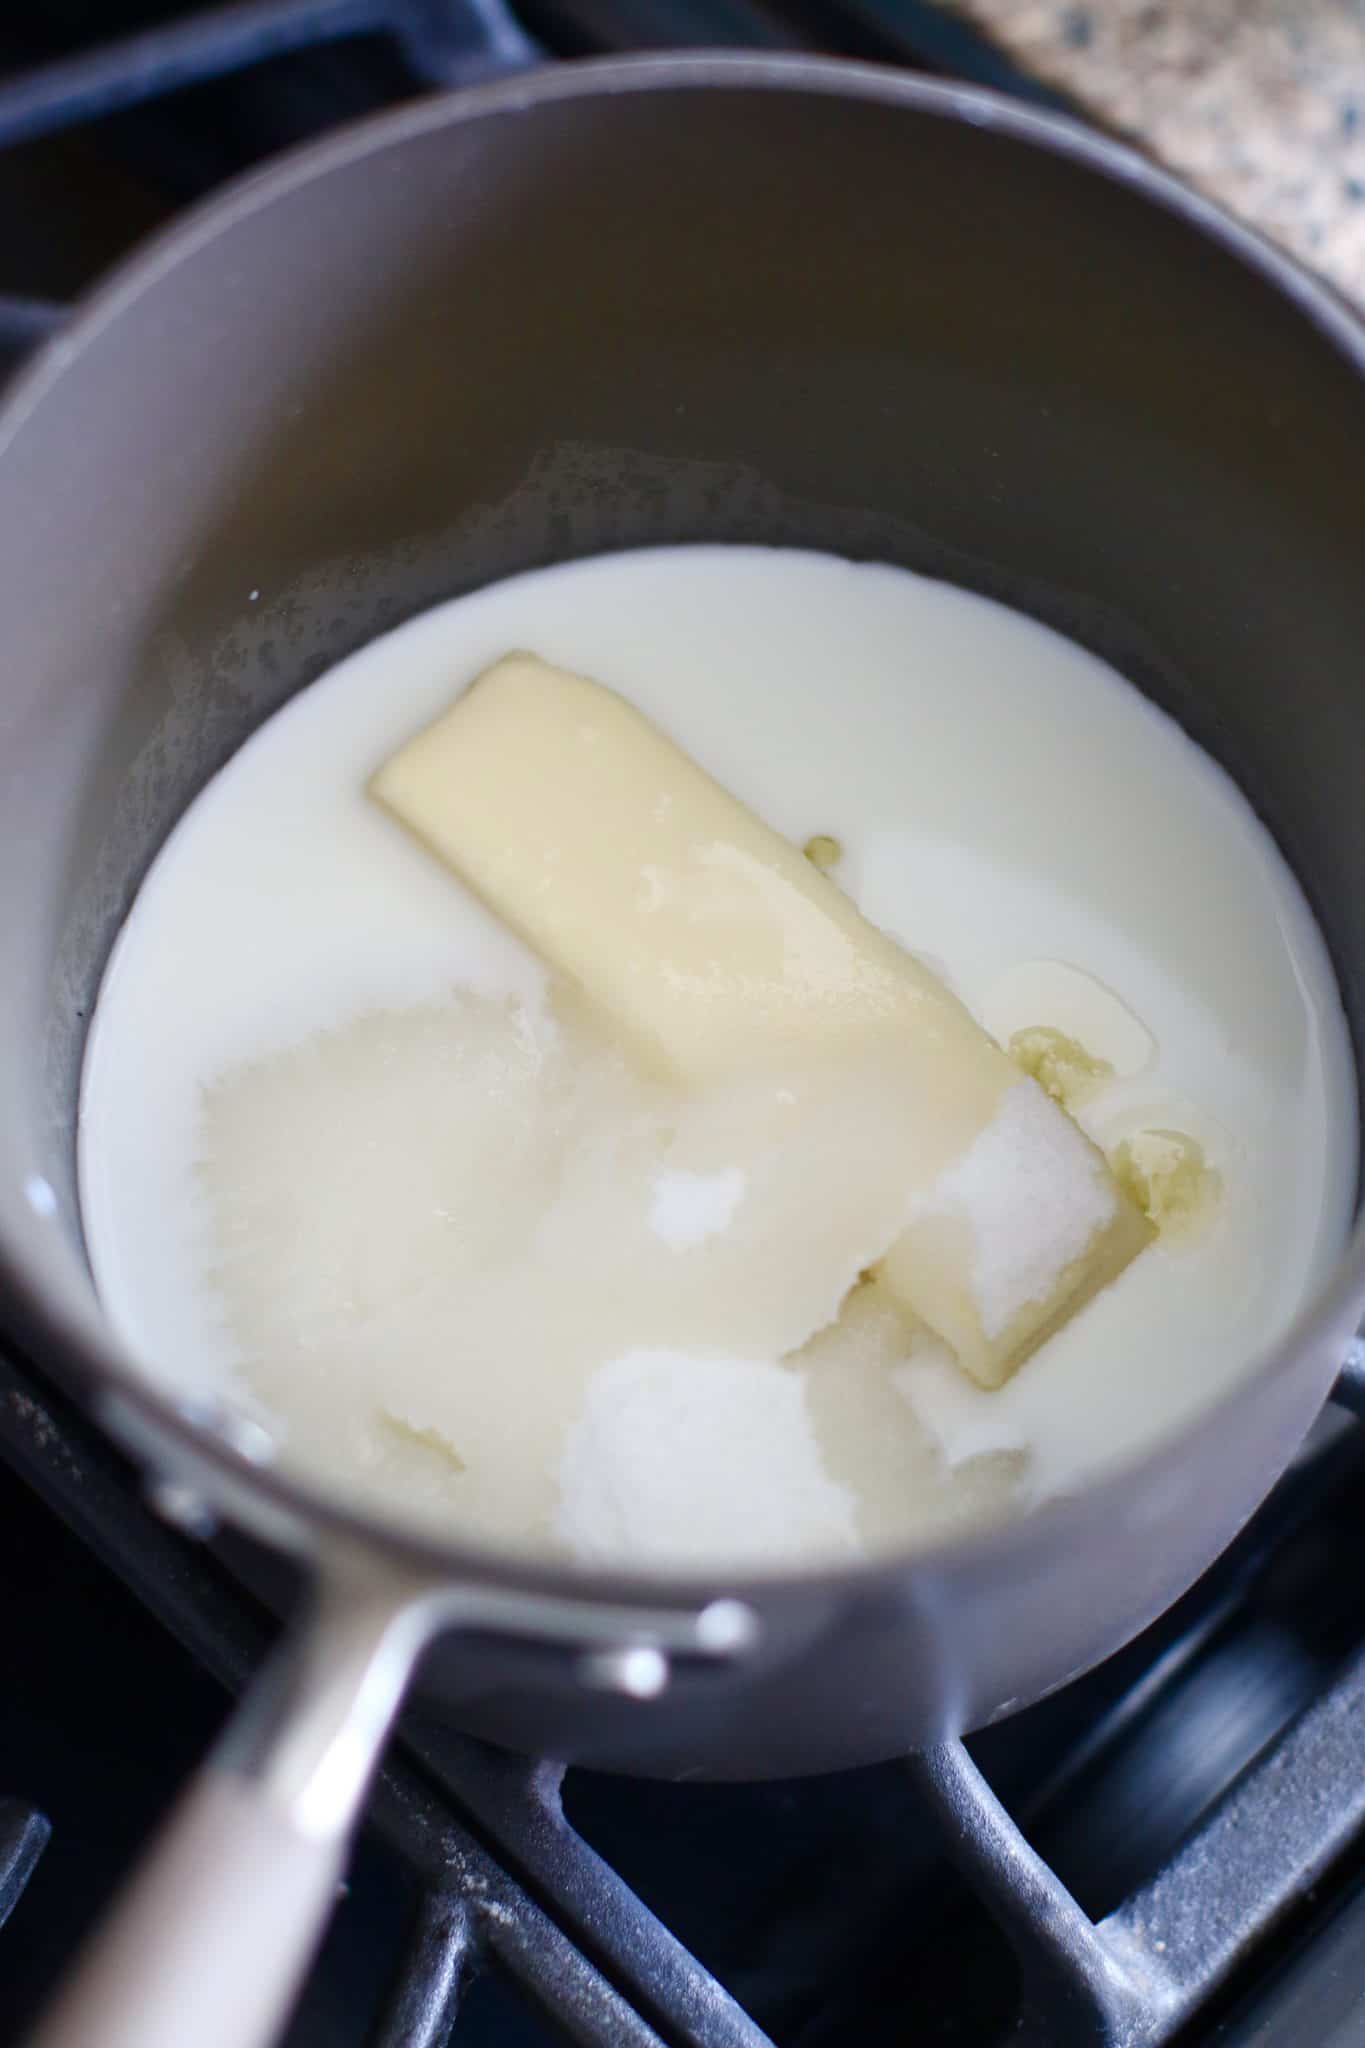 butter, sugar and milk shown in a pot on the stove.